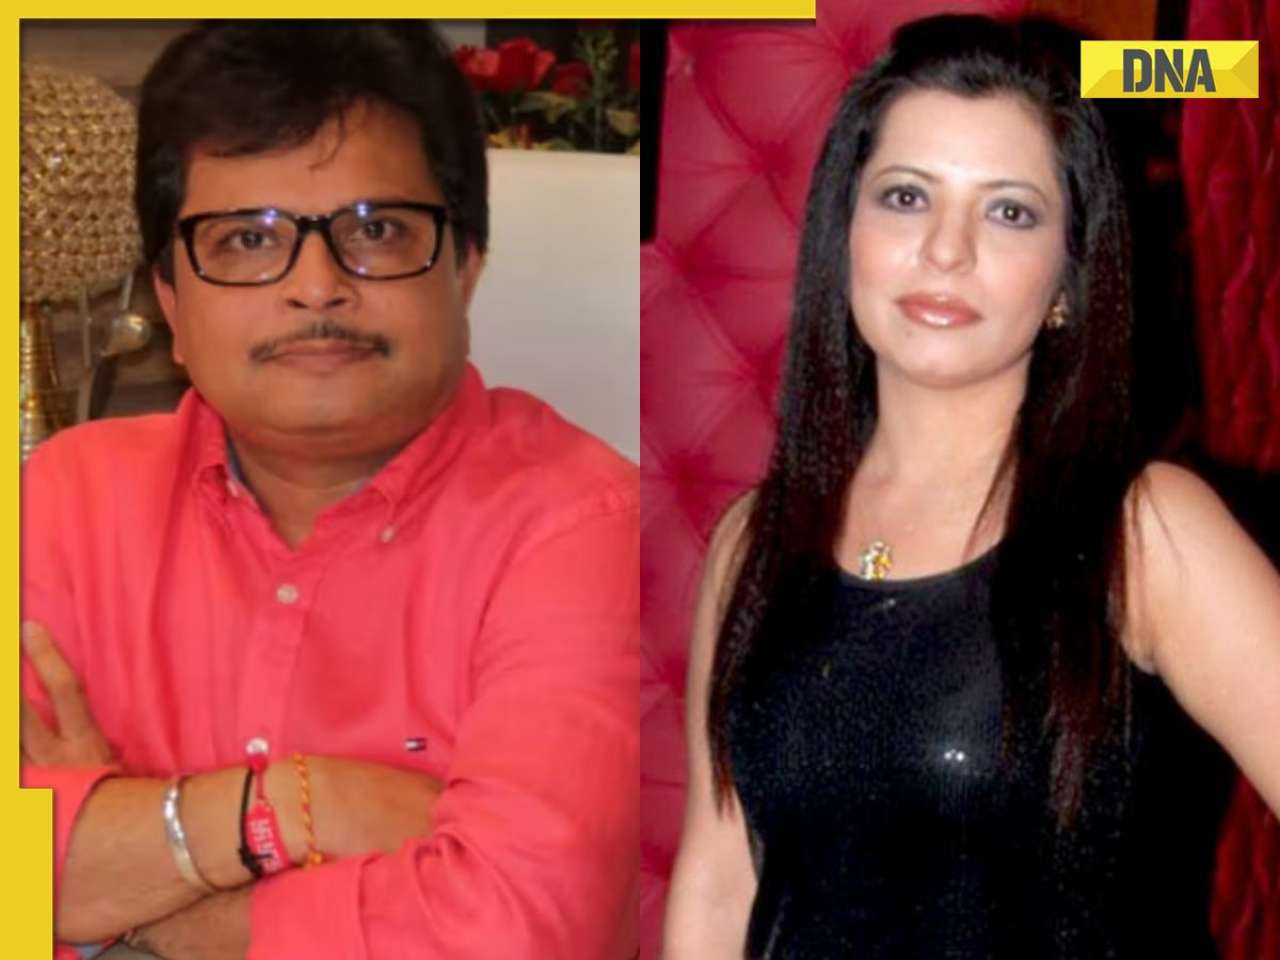 Taarak Mehta producer Asit Modi faces setback in sexual harassment suit by Jennifer Mistry Bansiwal, ordered to pay...